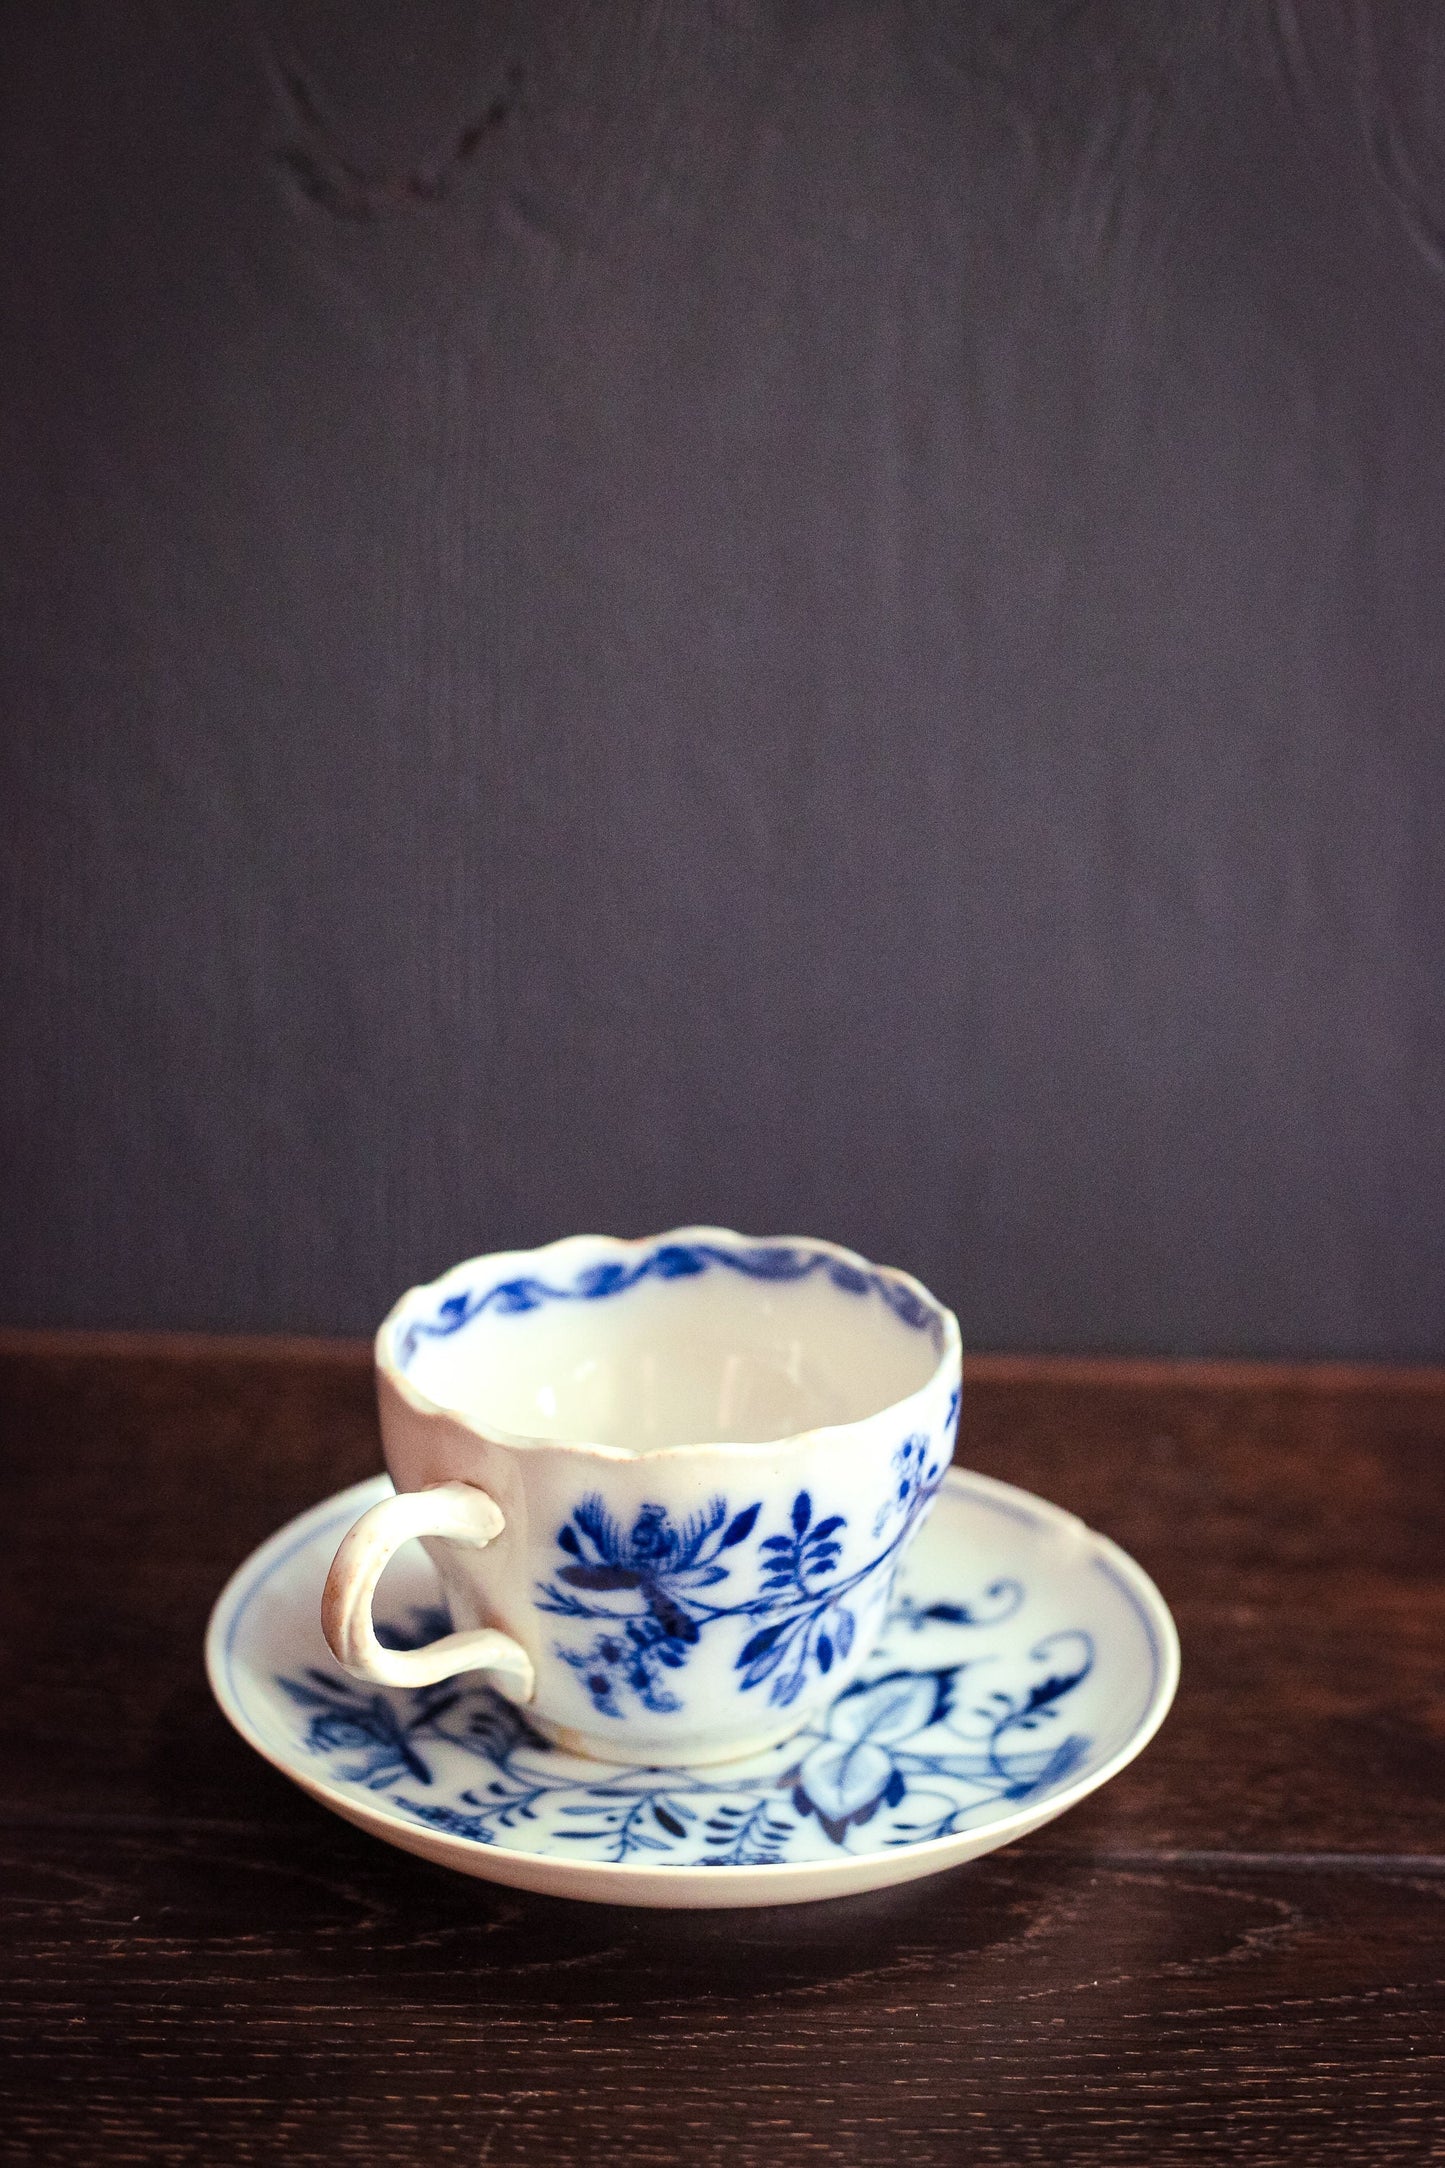 Antique Meissen Blue Onion Cup & Saucer - Germany Meissen Blue White Ceramic Tea Cup Saucer Oval Backstamp